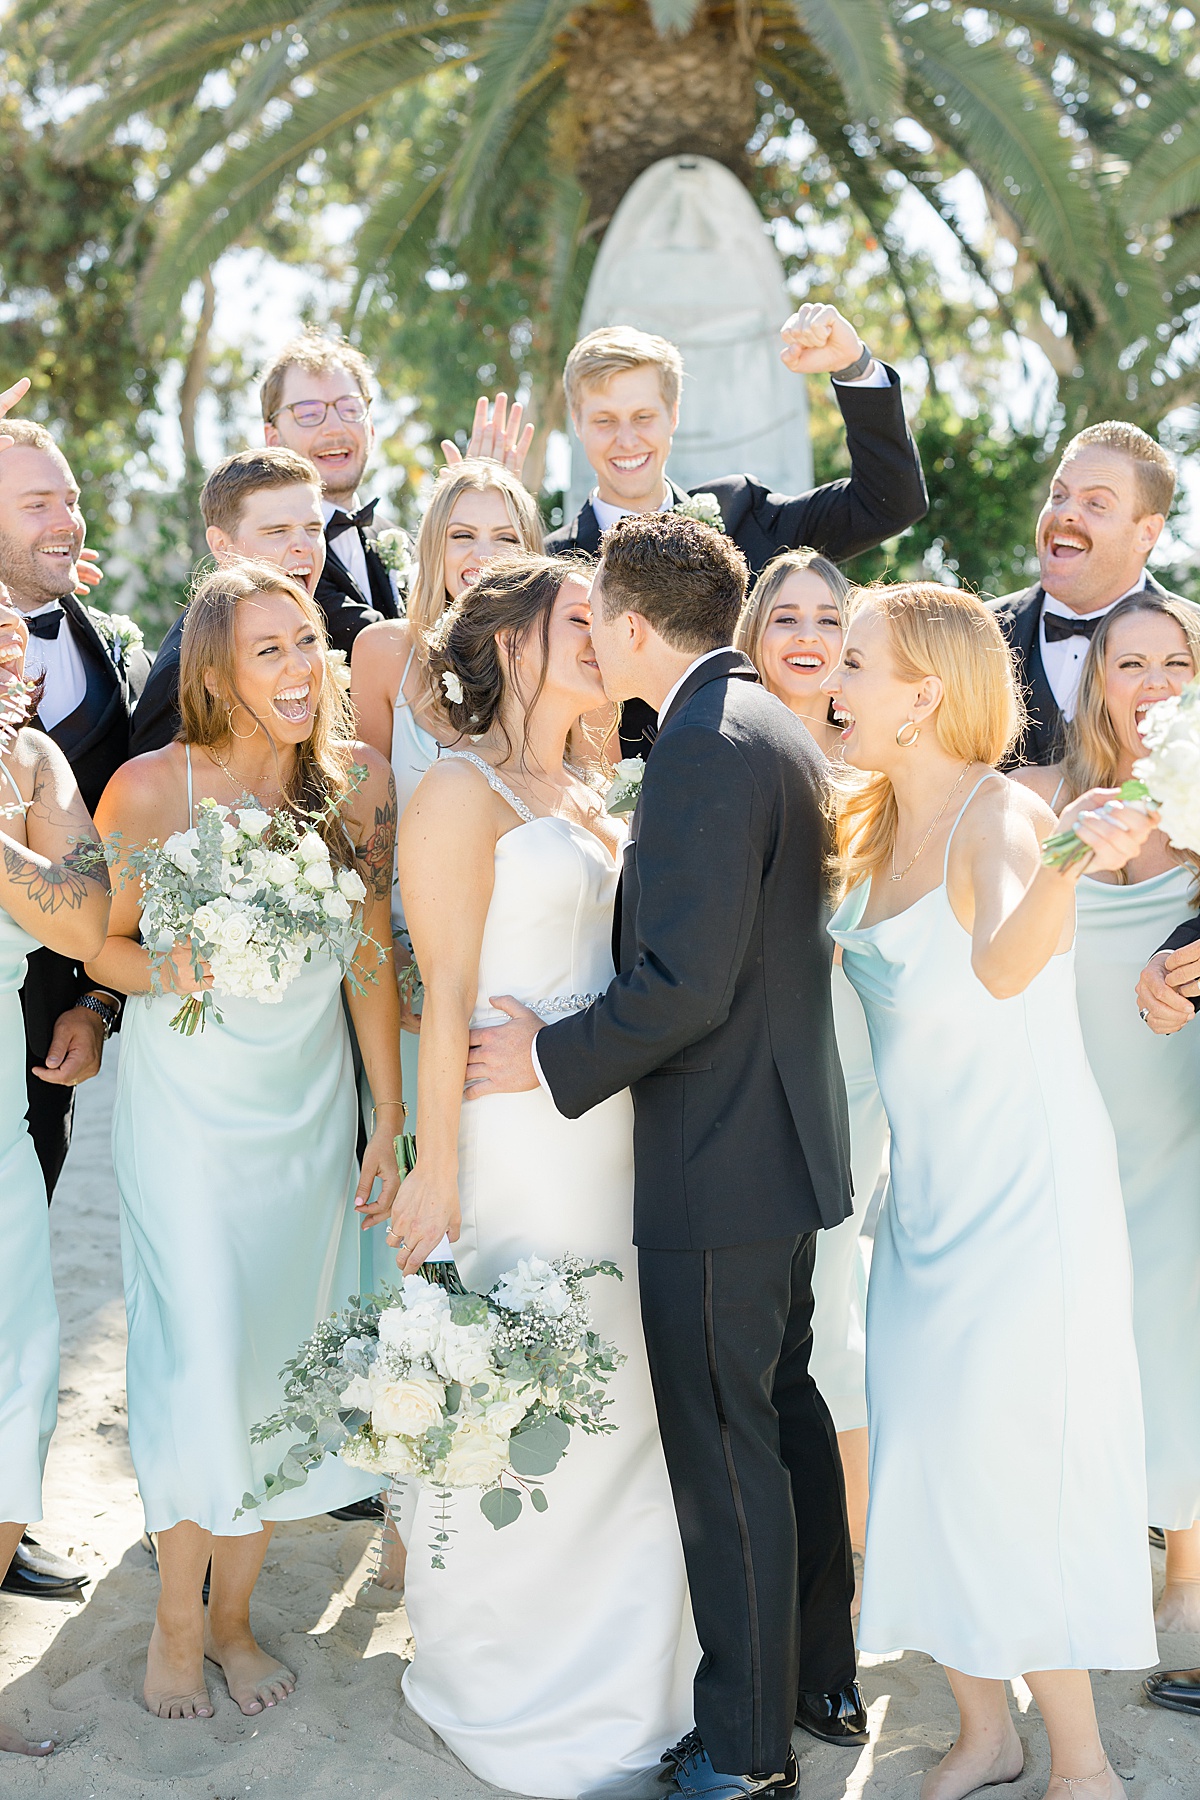 bride and groom kiss as wedding party in pale blue dresses and black tuxes cheer | Hunter Hennes Photography